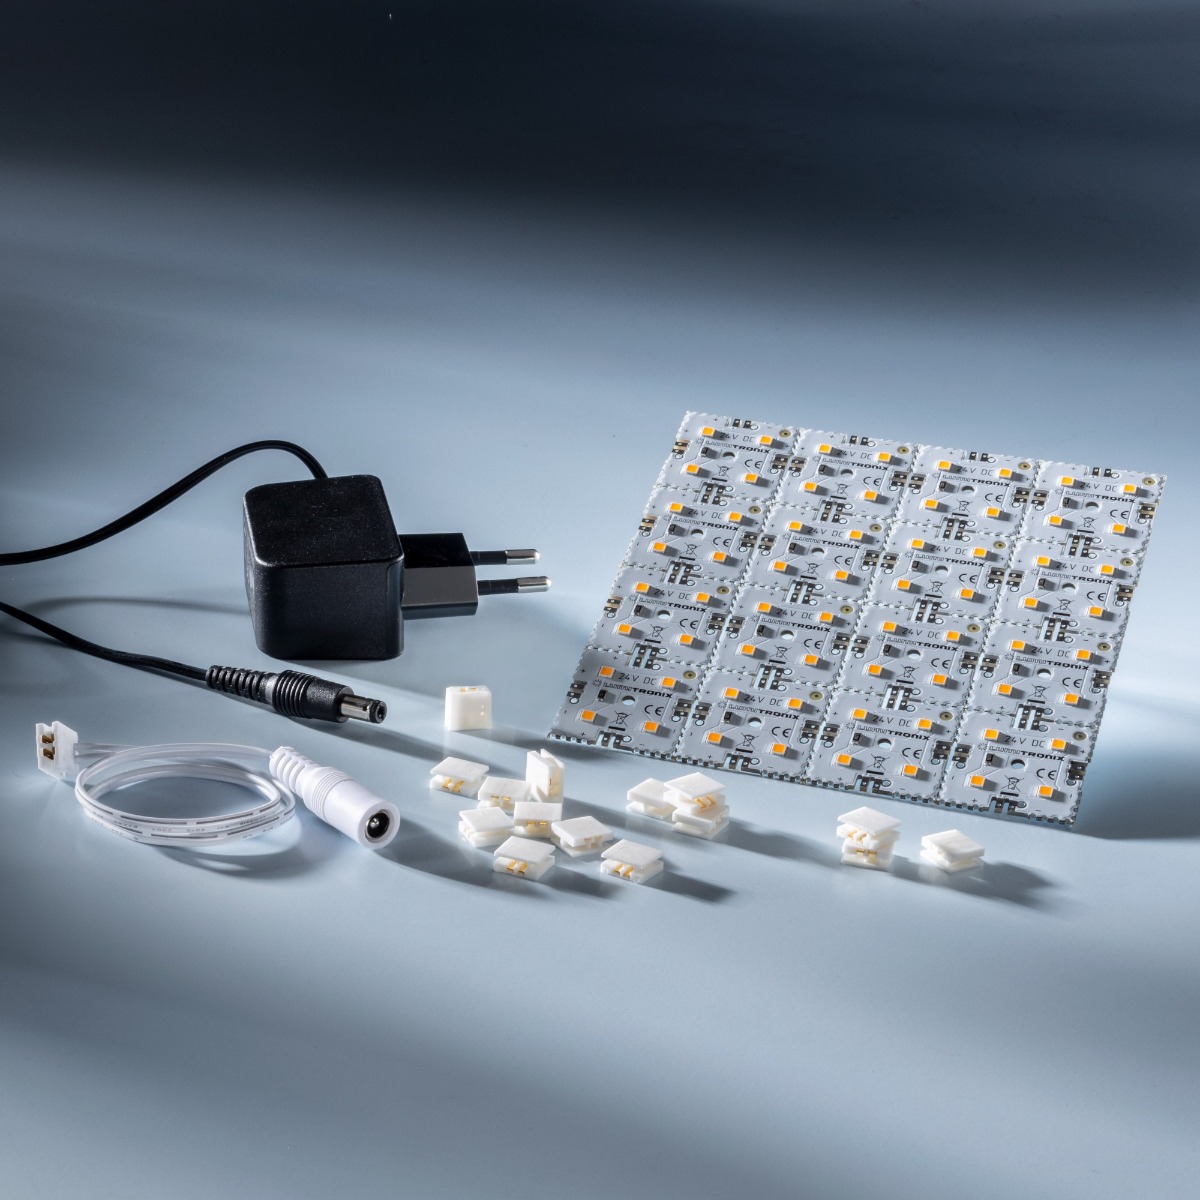 Plug&Play Starter-Set 16x Nichia LED Backlight Module MatrixMini 4 LEDs 24V White 2700K 1088lm and 7.6W 12x12cm total with driver and cables